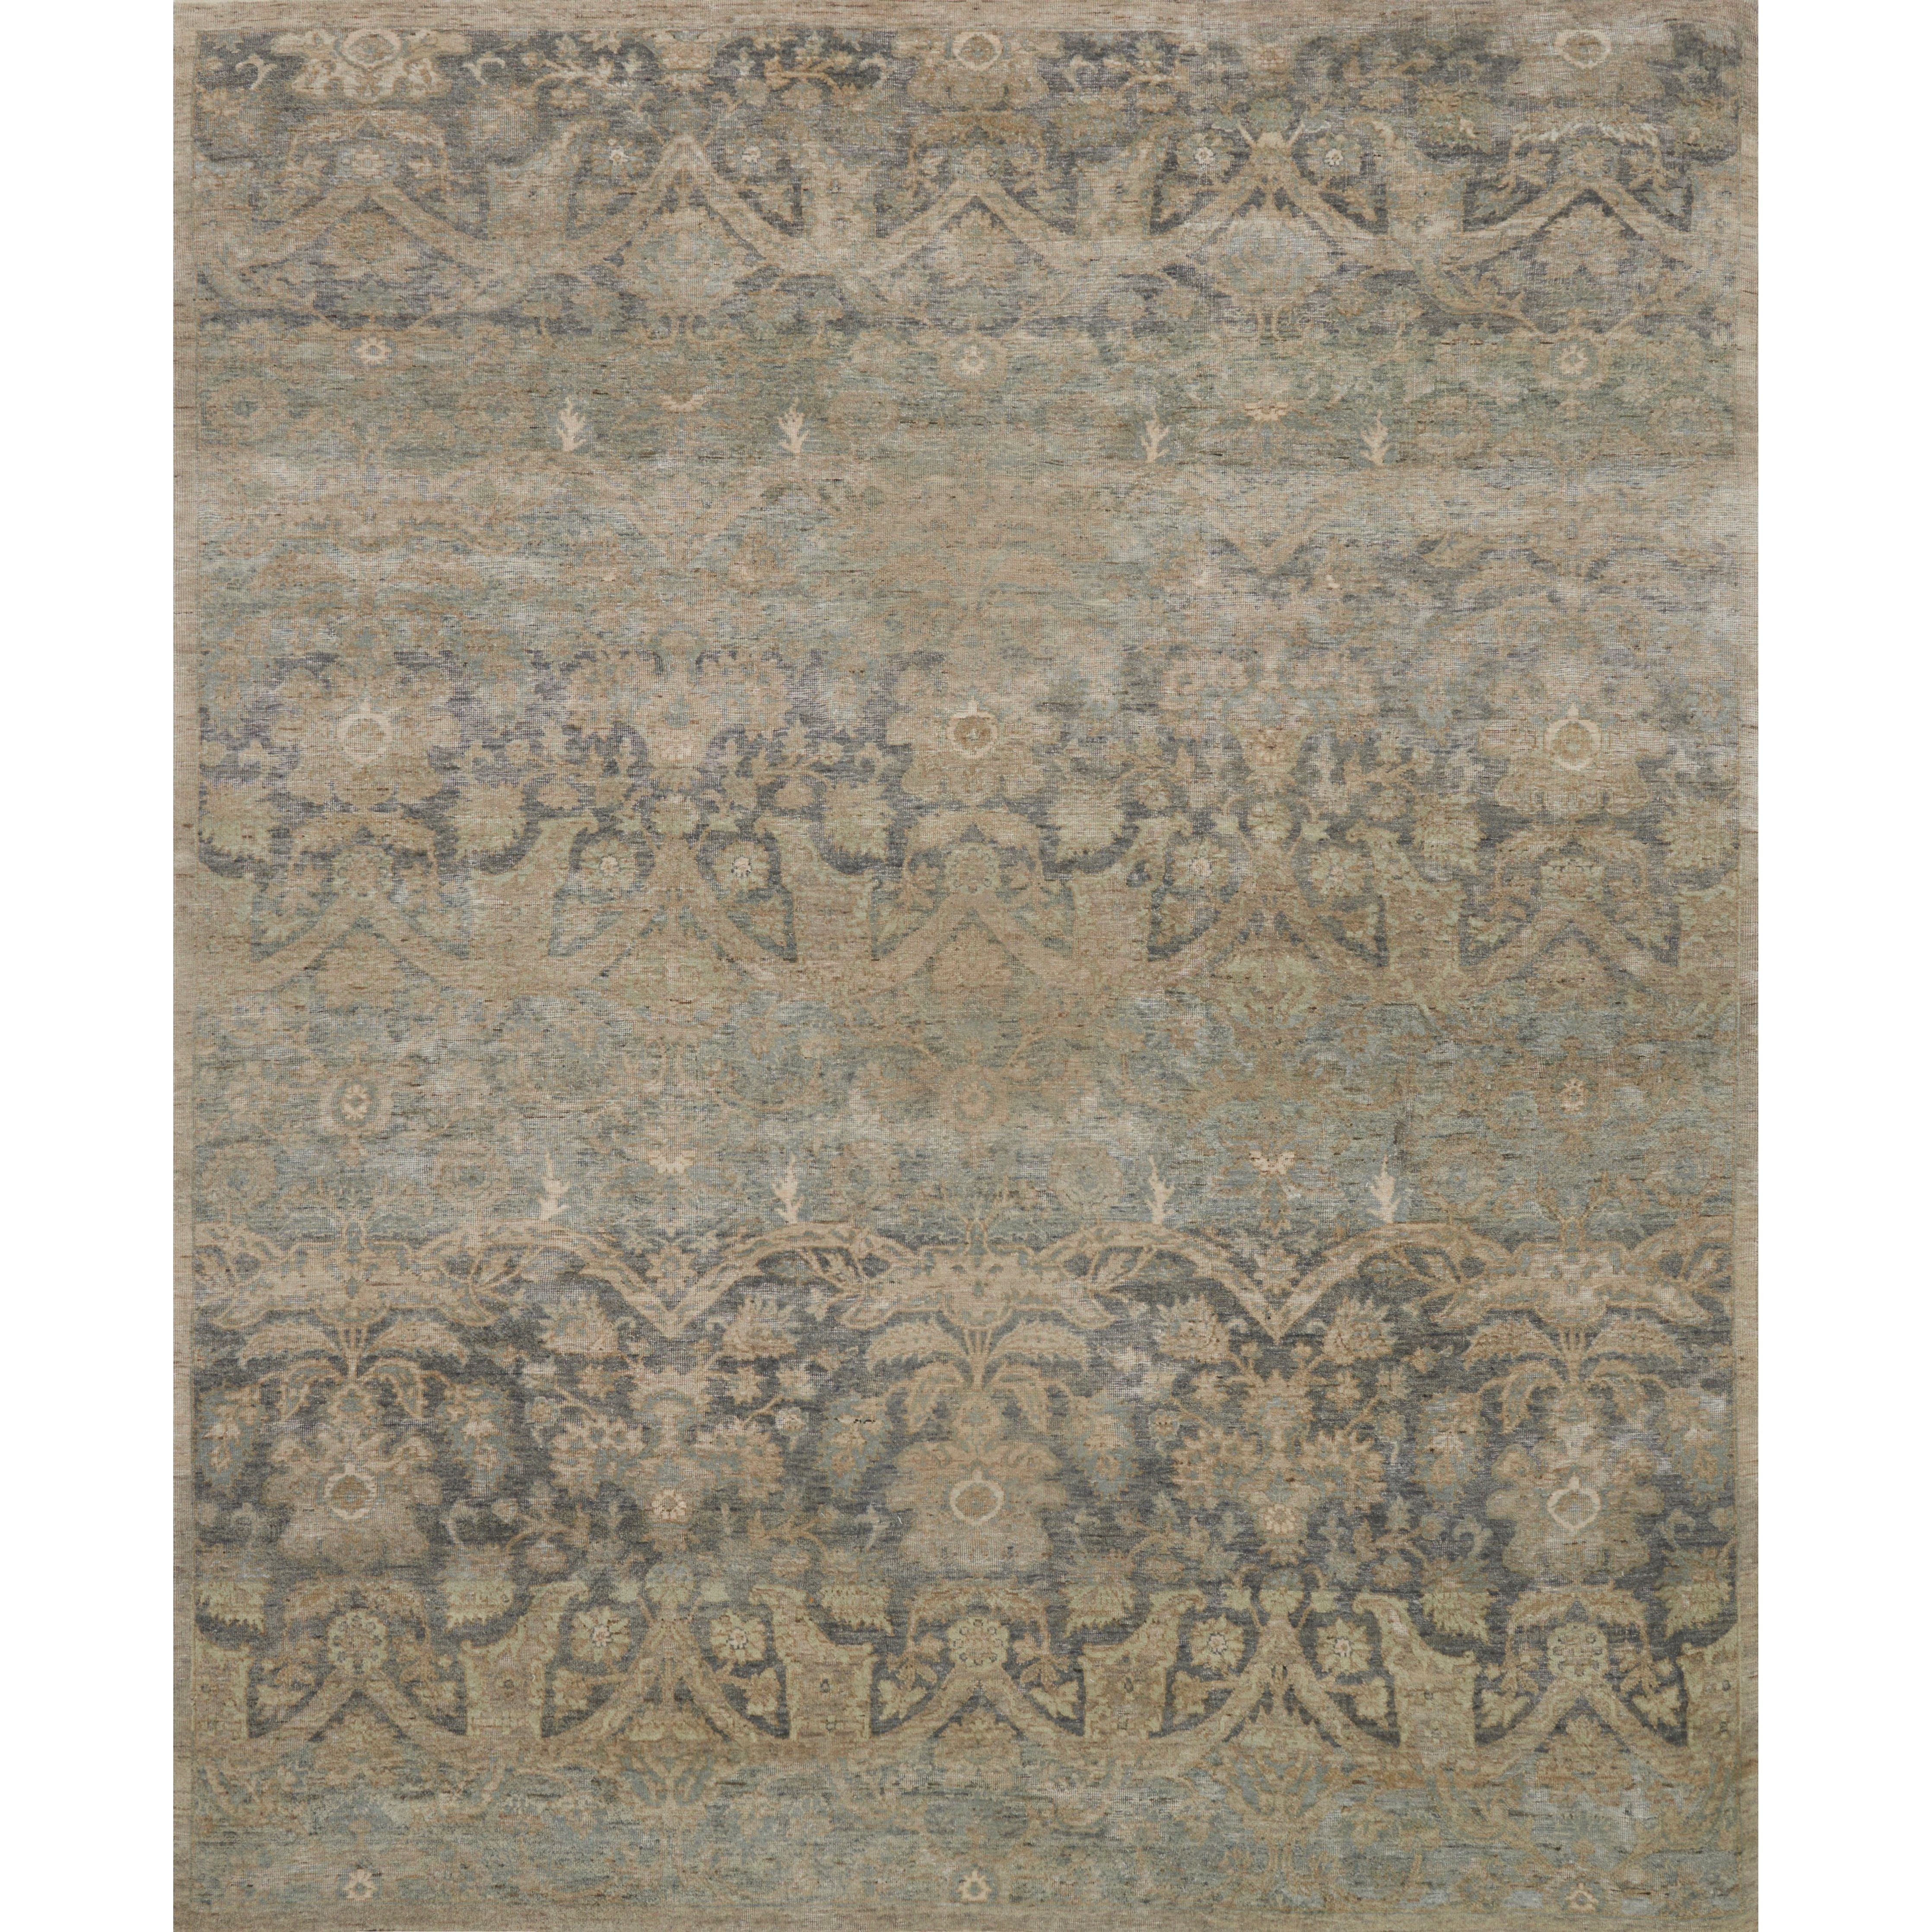 The Legacy Storm LZ-02 Rug from Loloi is hand-knotted, refined, yet versatile for hallways, living rooms, bedrooms, and extra large spaces. The Legacy rug is deliberately distressed and sheared down to an extra low pile of 100% wool, creating a patina usually only imparted through decades of wear. Amethyst Home provides interior design, new construction, custom furniture, and rugs for the Omaha and Lincoln metro area.